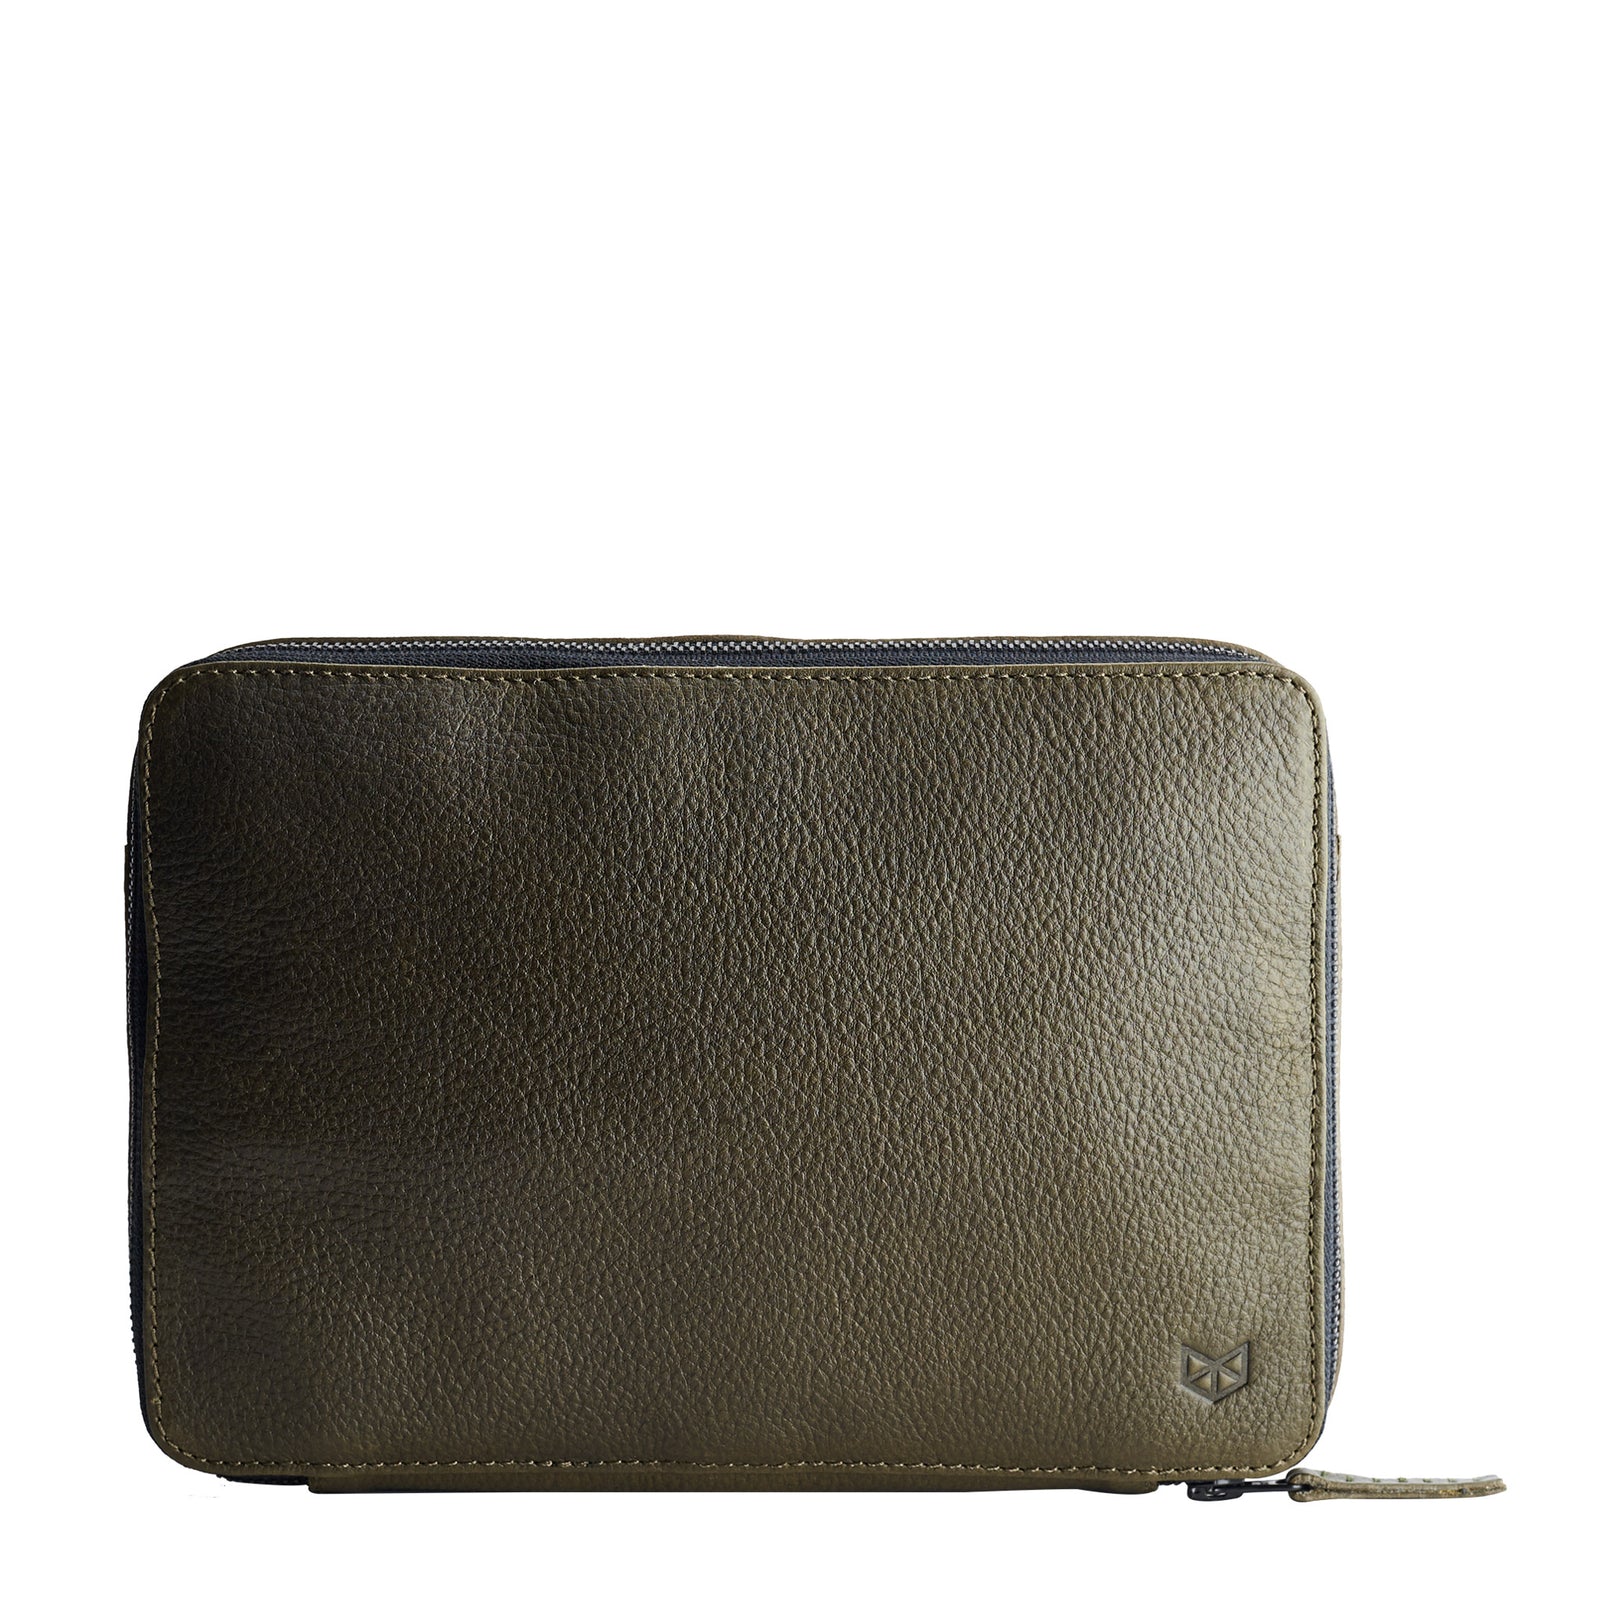 Green leather gadget bag, tech dopp kit, electronic organizer. Fits iPad Pro with Apple pencil.